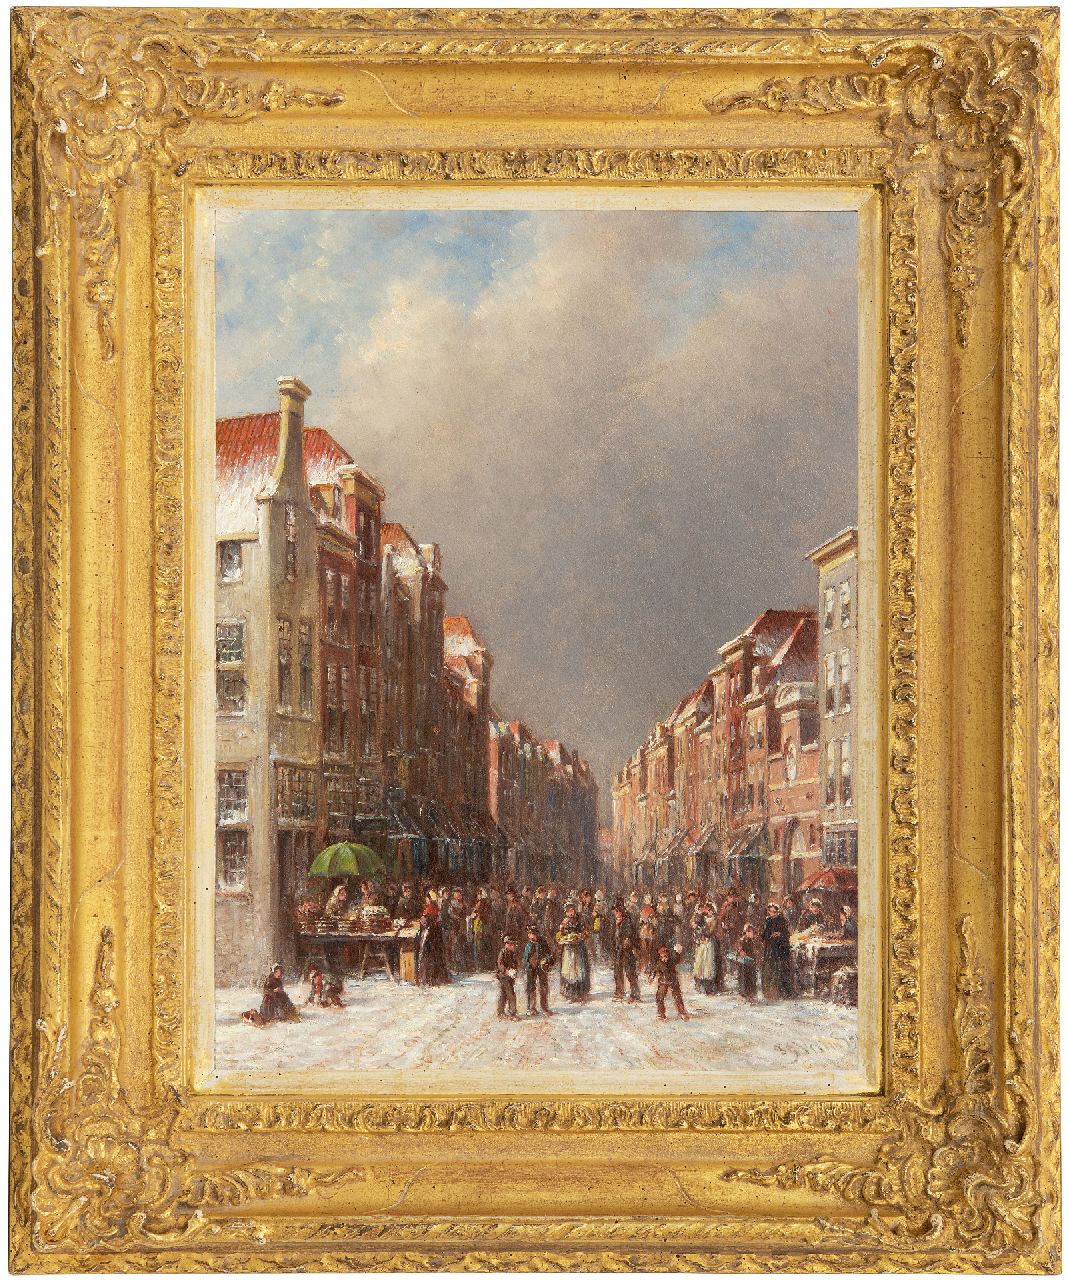 Vertin P.G.  | Petrus Gerardus Vertin | Paintings offered for sale | Market on a winter day, oil on panel 36.1 x 27.5 cm, signed l.r. and dated '91